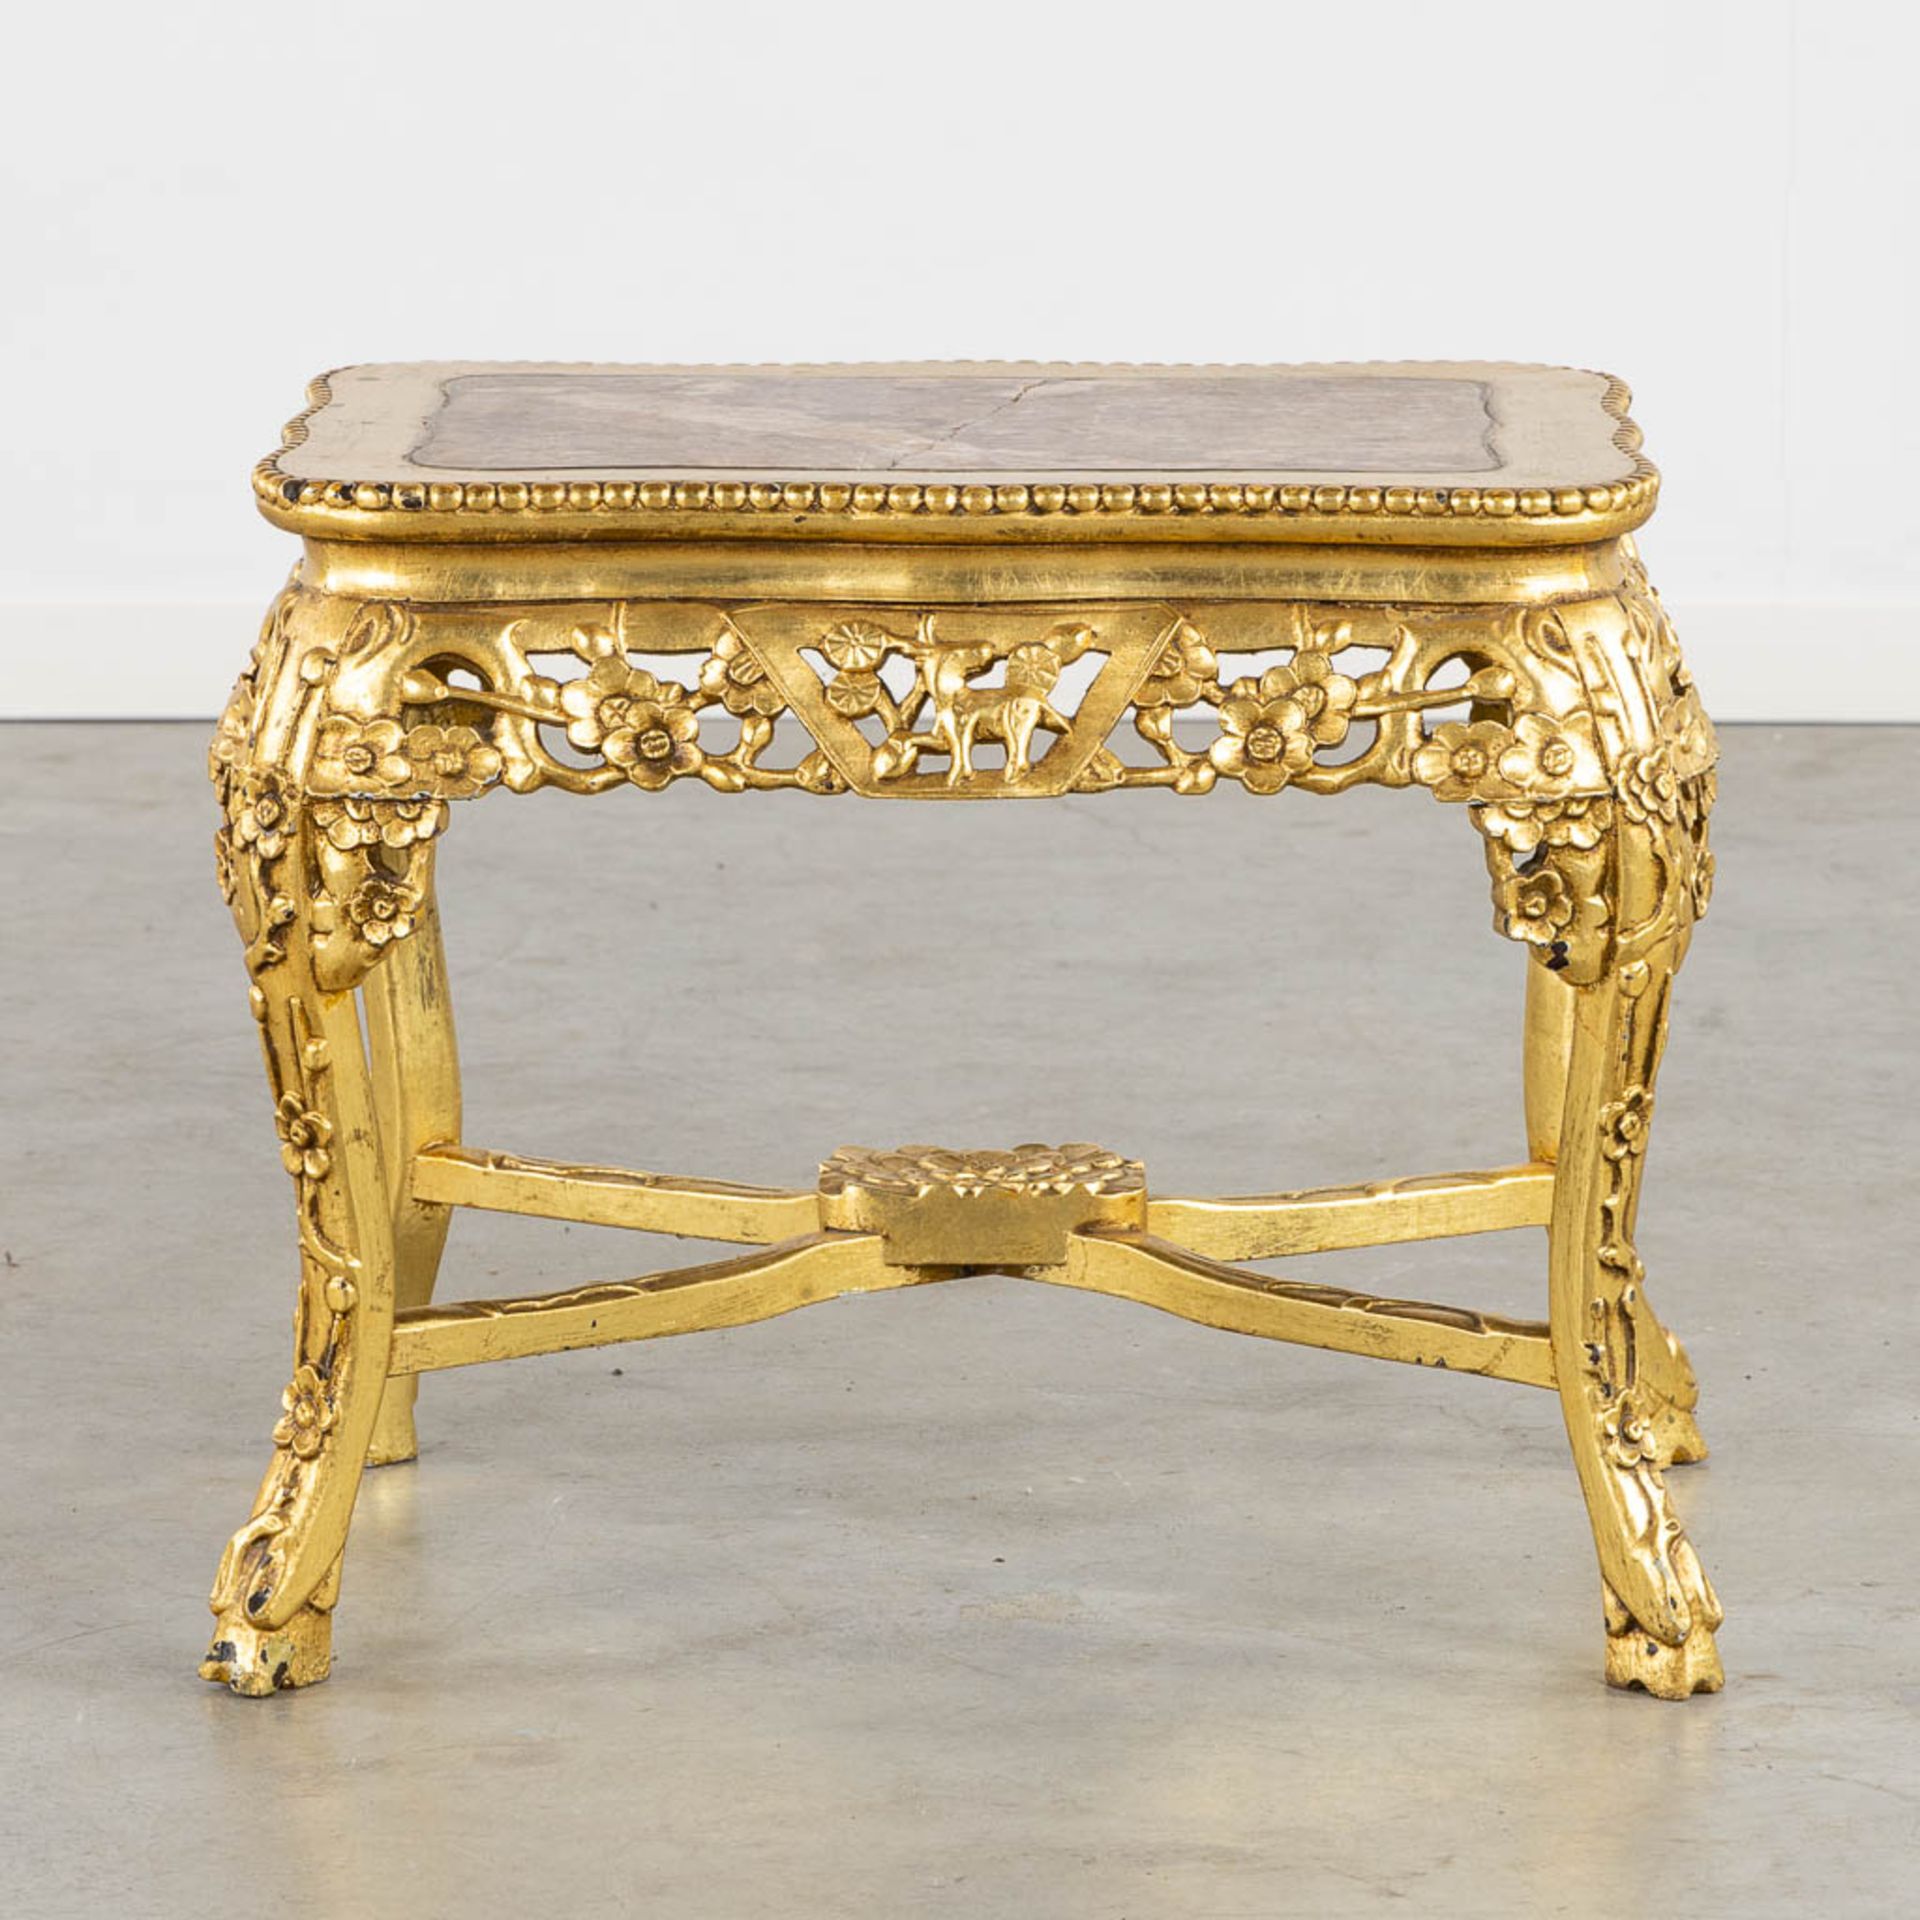 An oriental style side table, gilt wood with a marble top. (L:46 x W:52 x H:48 cm) - Bild 3 aus 12